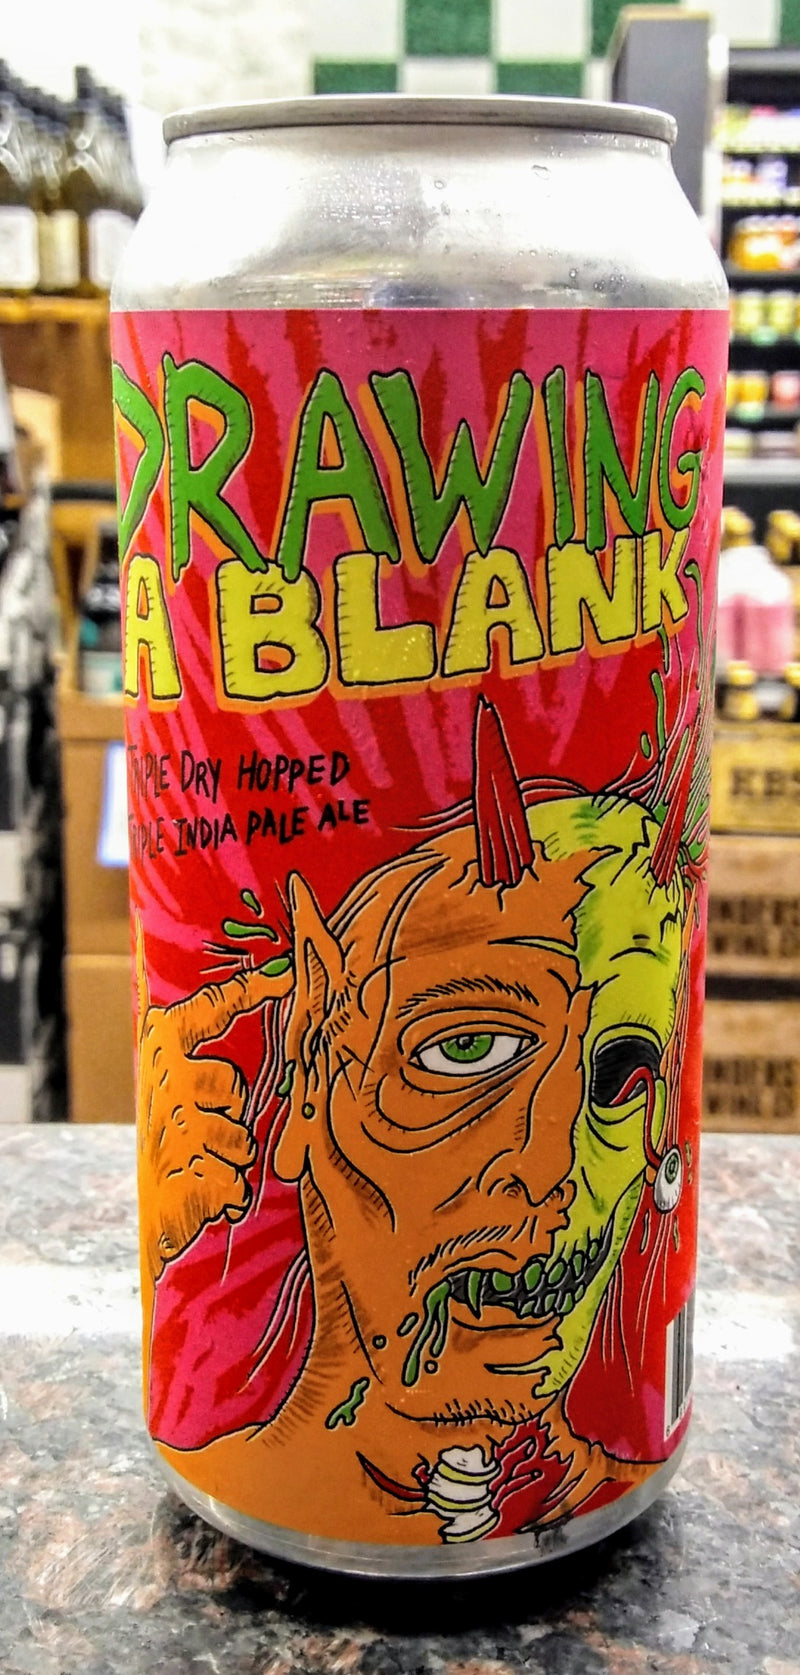 ABOMINATION BREWING CO. DRAWING A BLANK TRIPLE IPA 16oz can